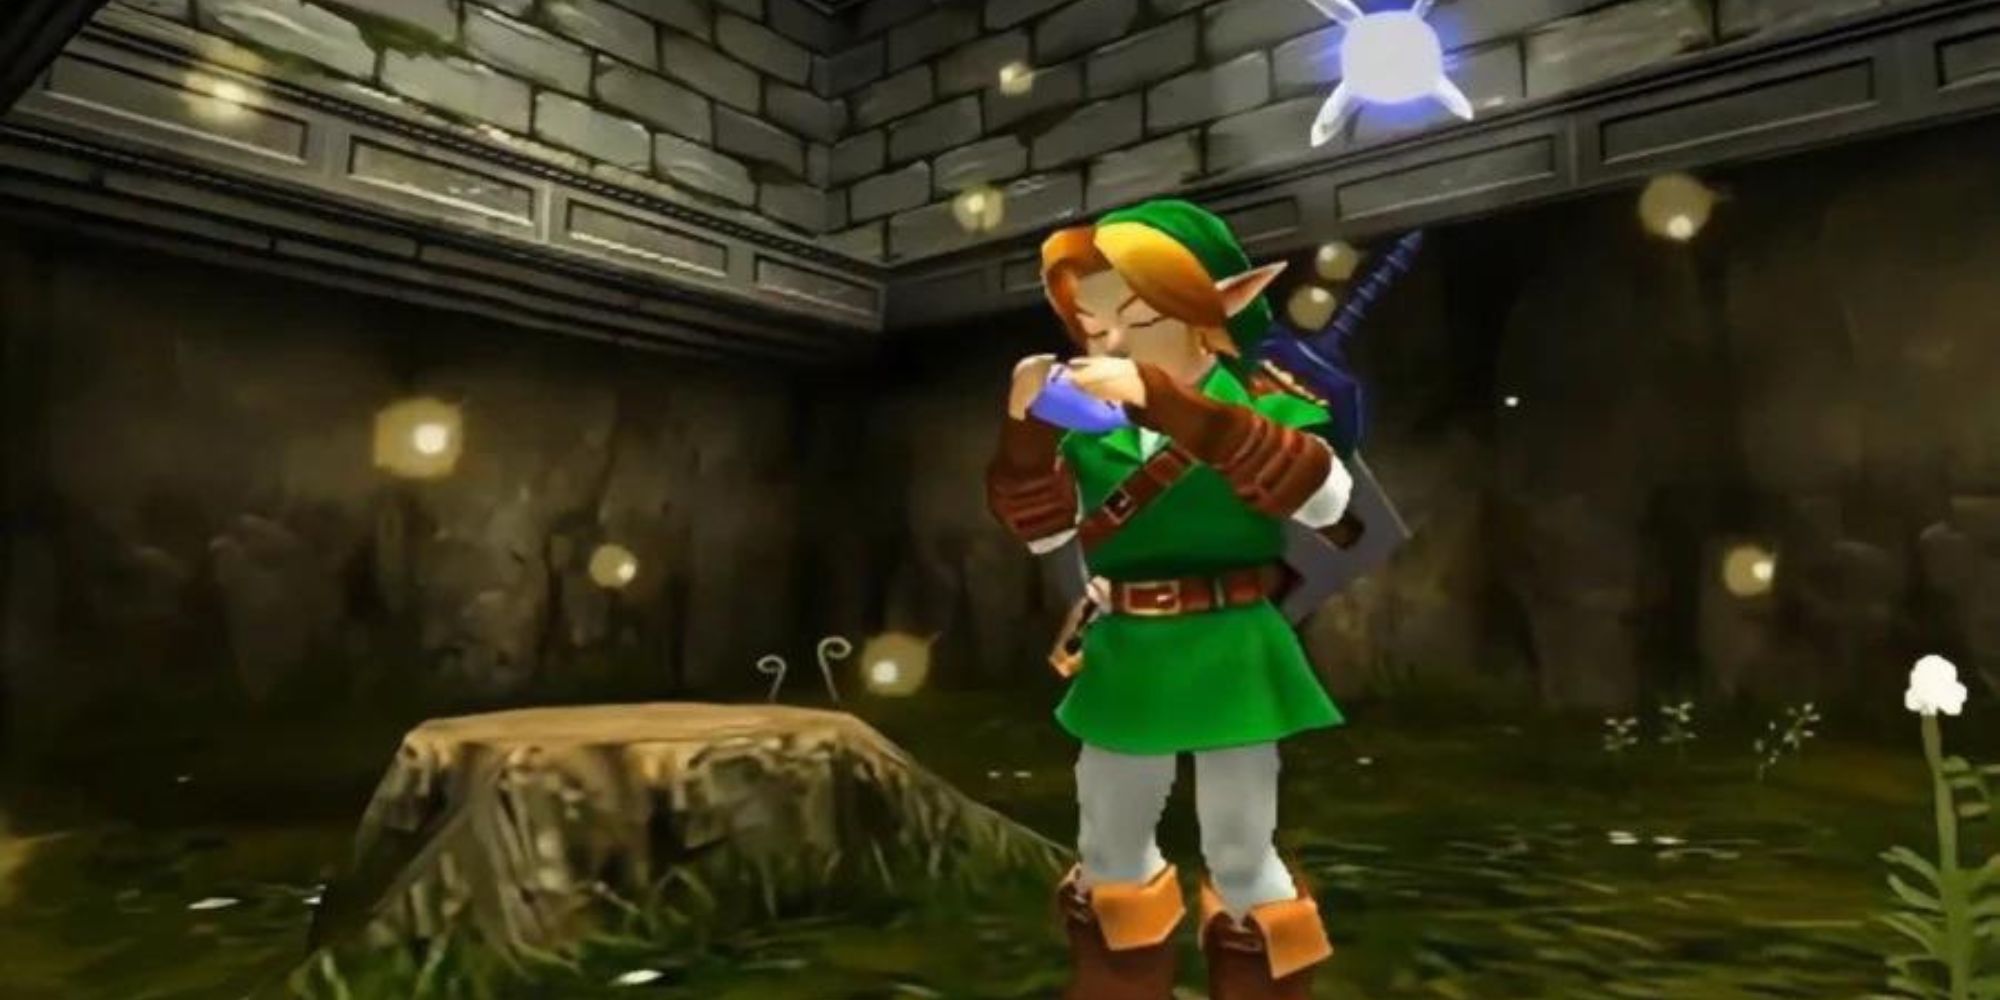 Link plays the Ocarina of Time in the forest